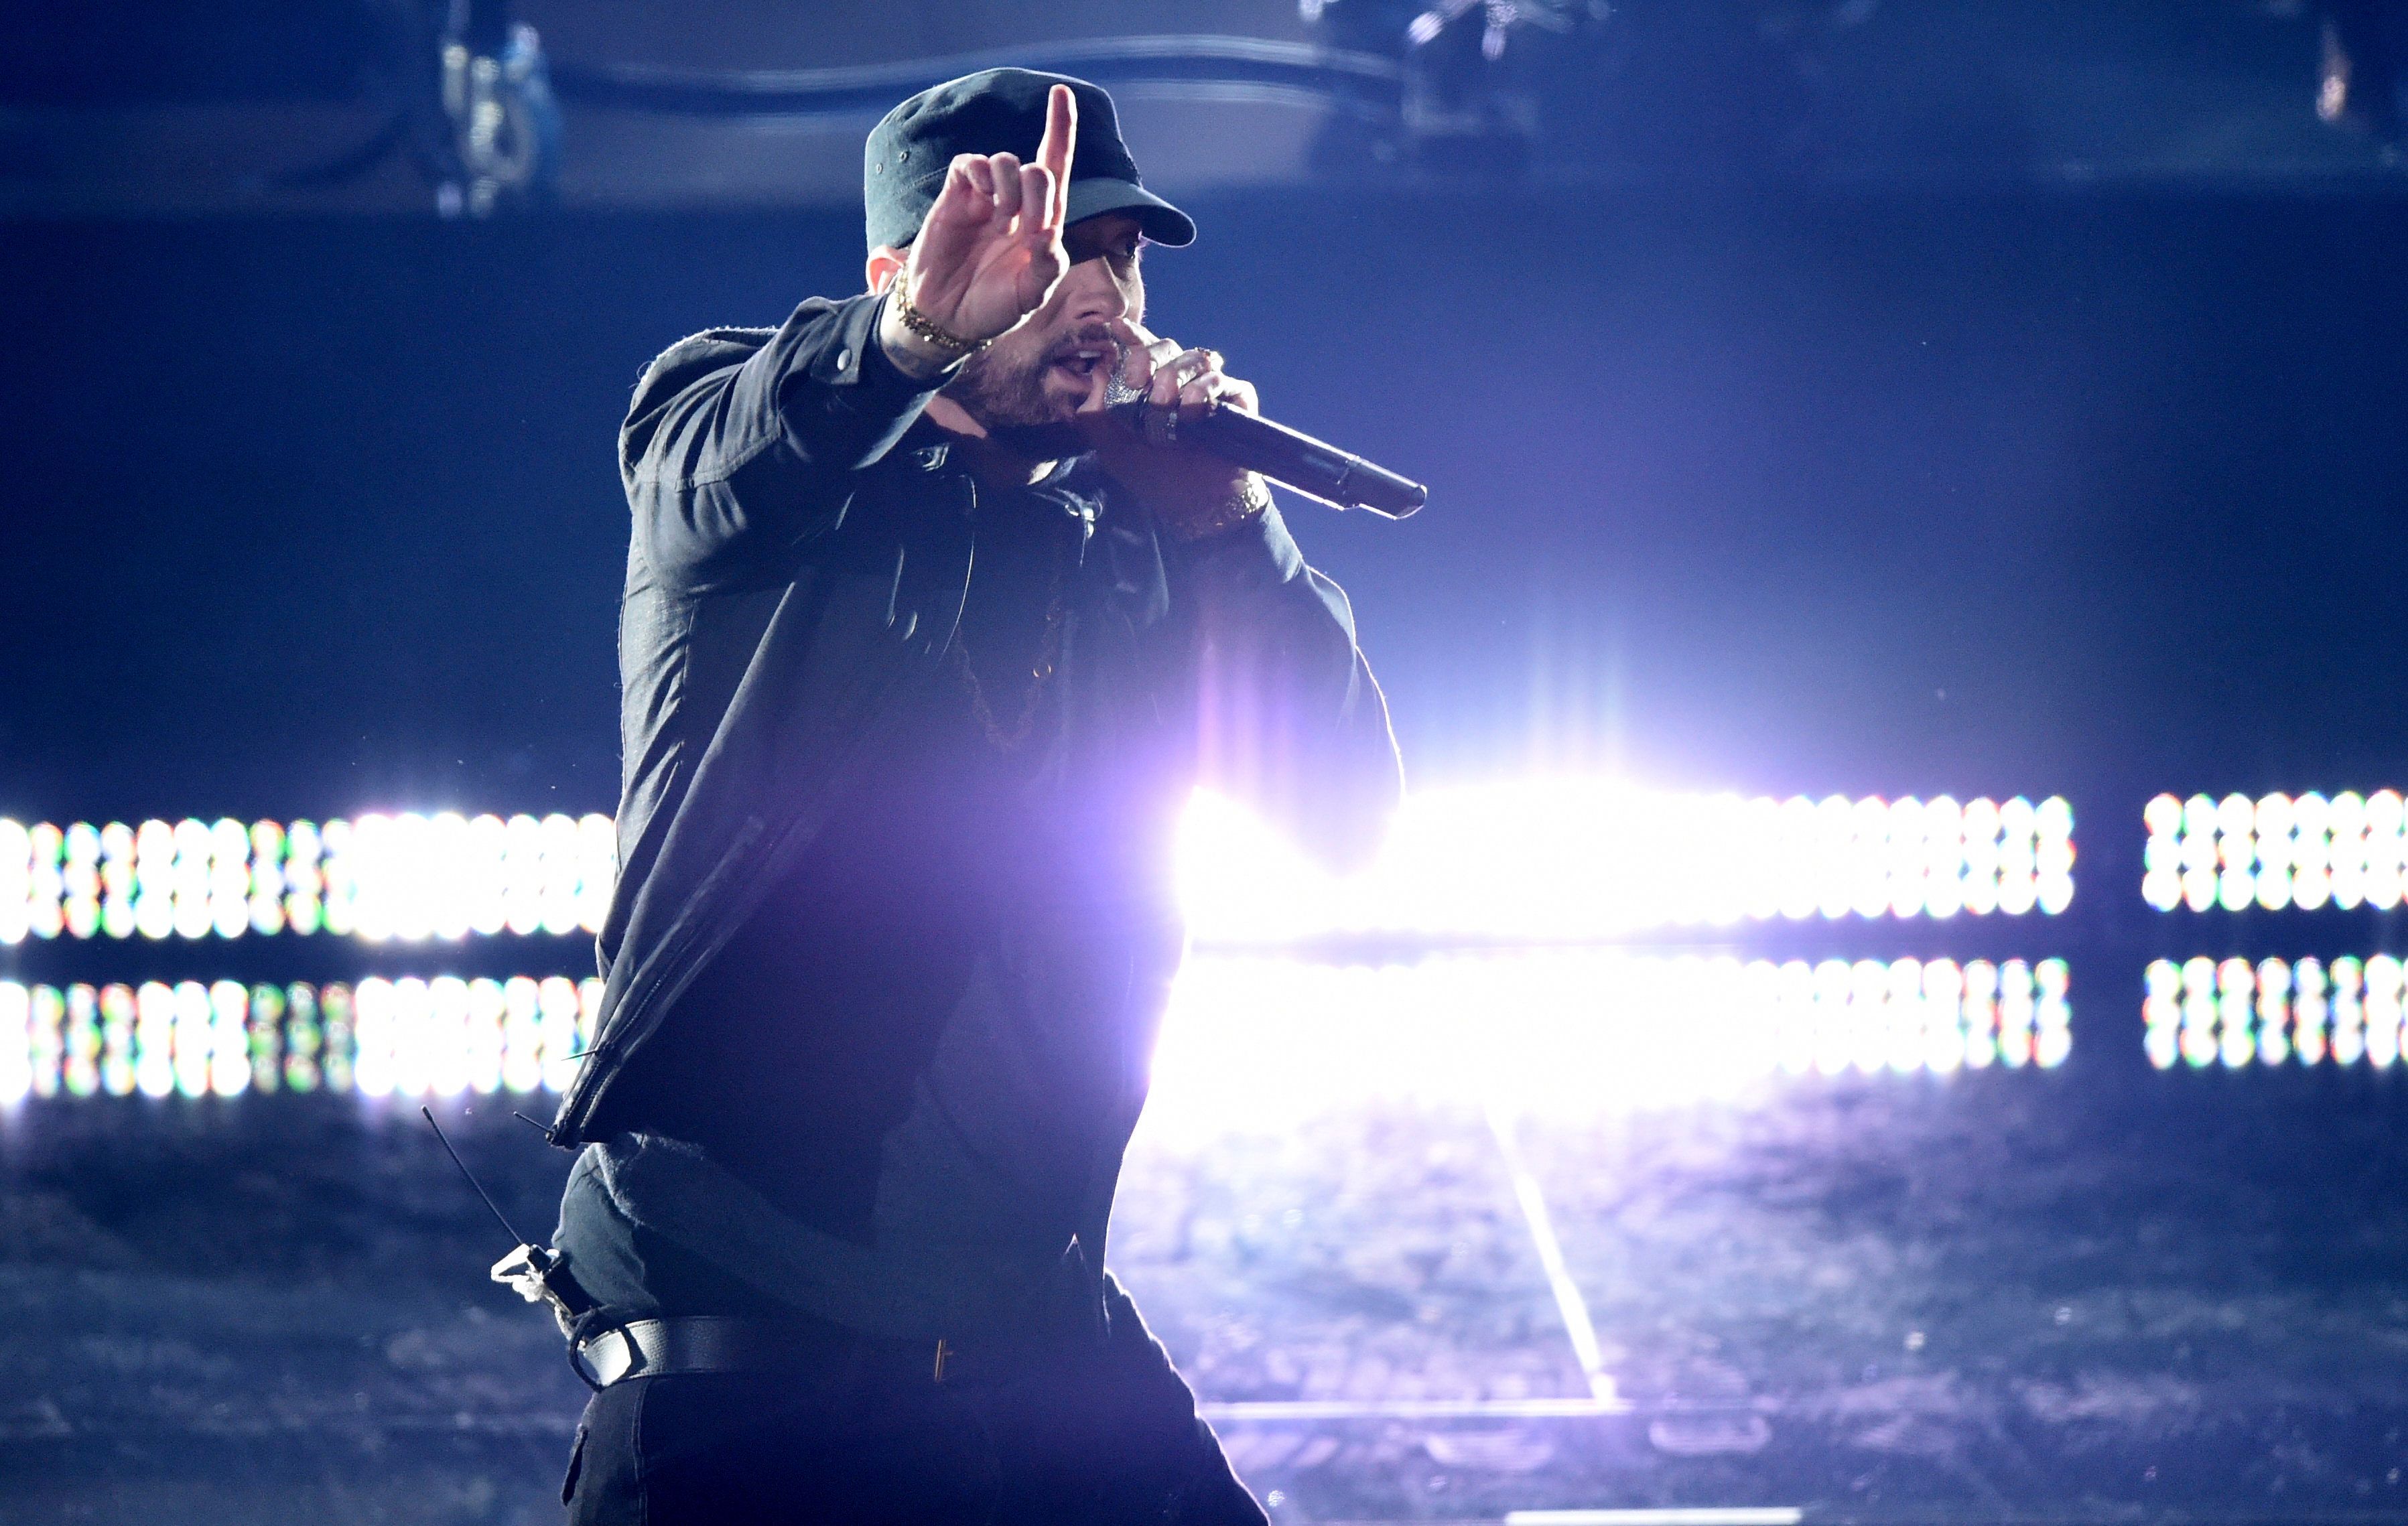 Eminem Makes Surprise Appearance At Oscars With A Special Performance